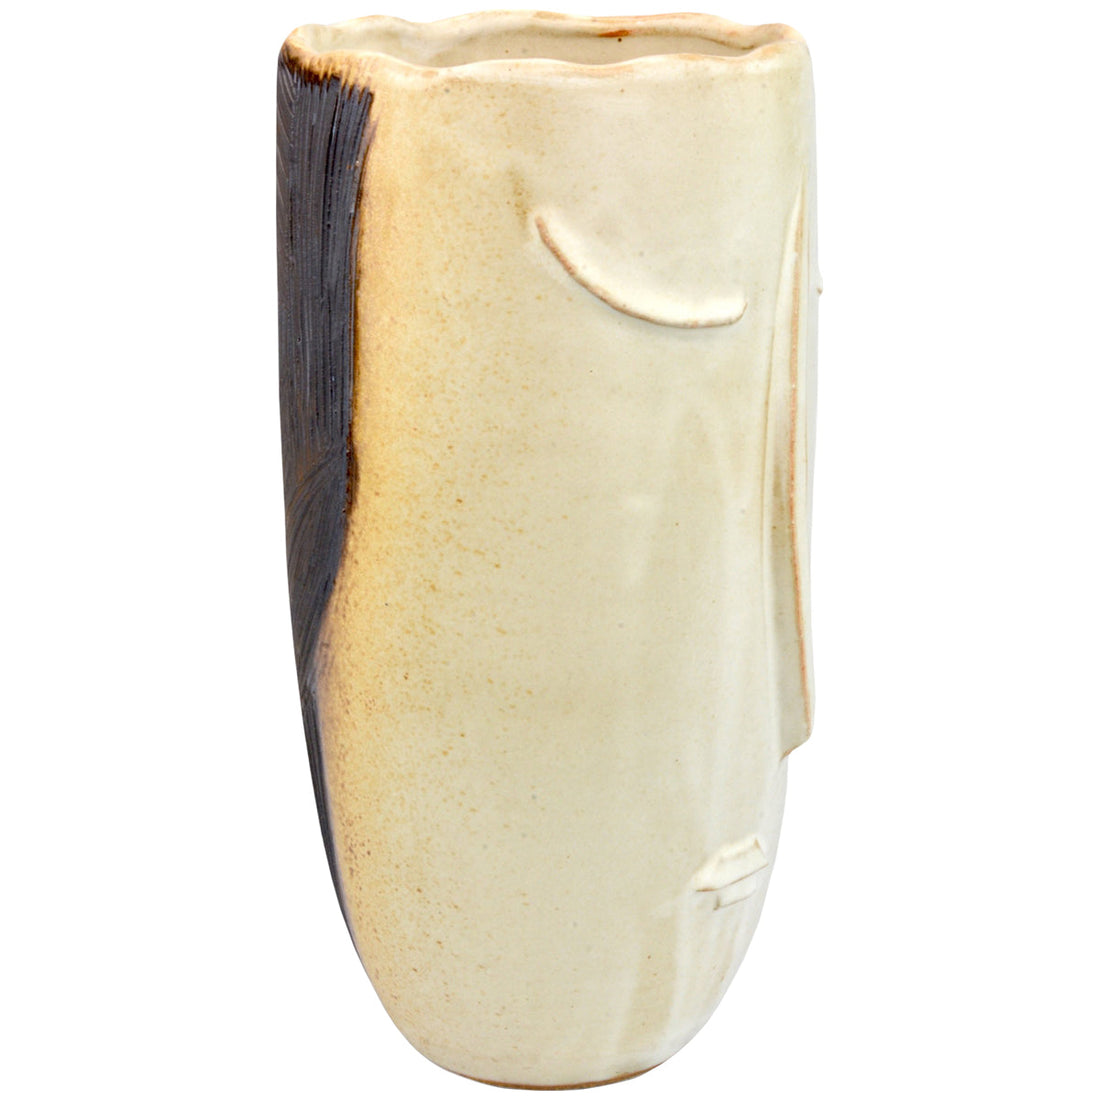 Currey and Company Playwright Vase